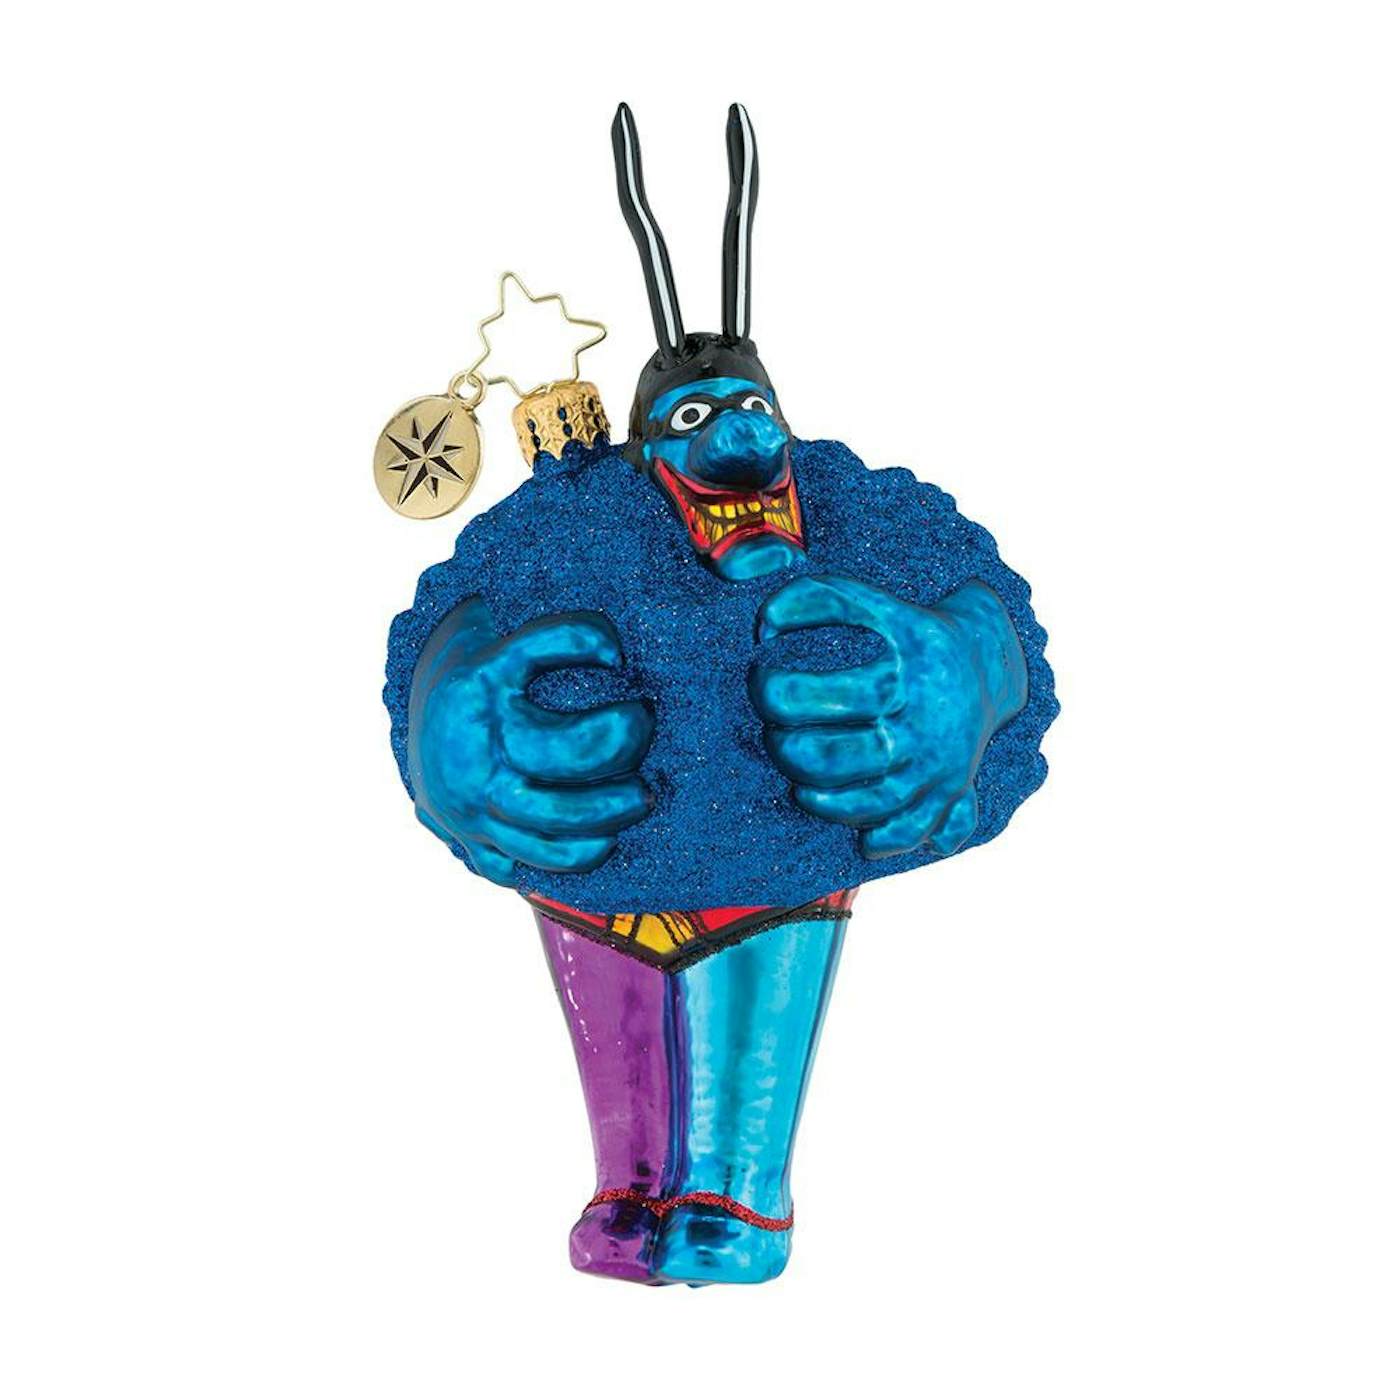 The Beatles Merry Blue Meanie Ornament